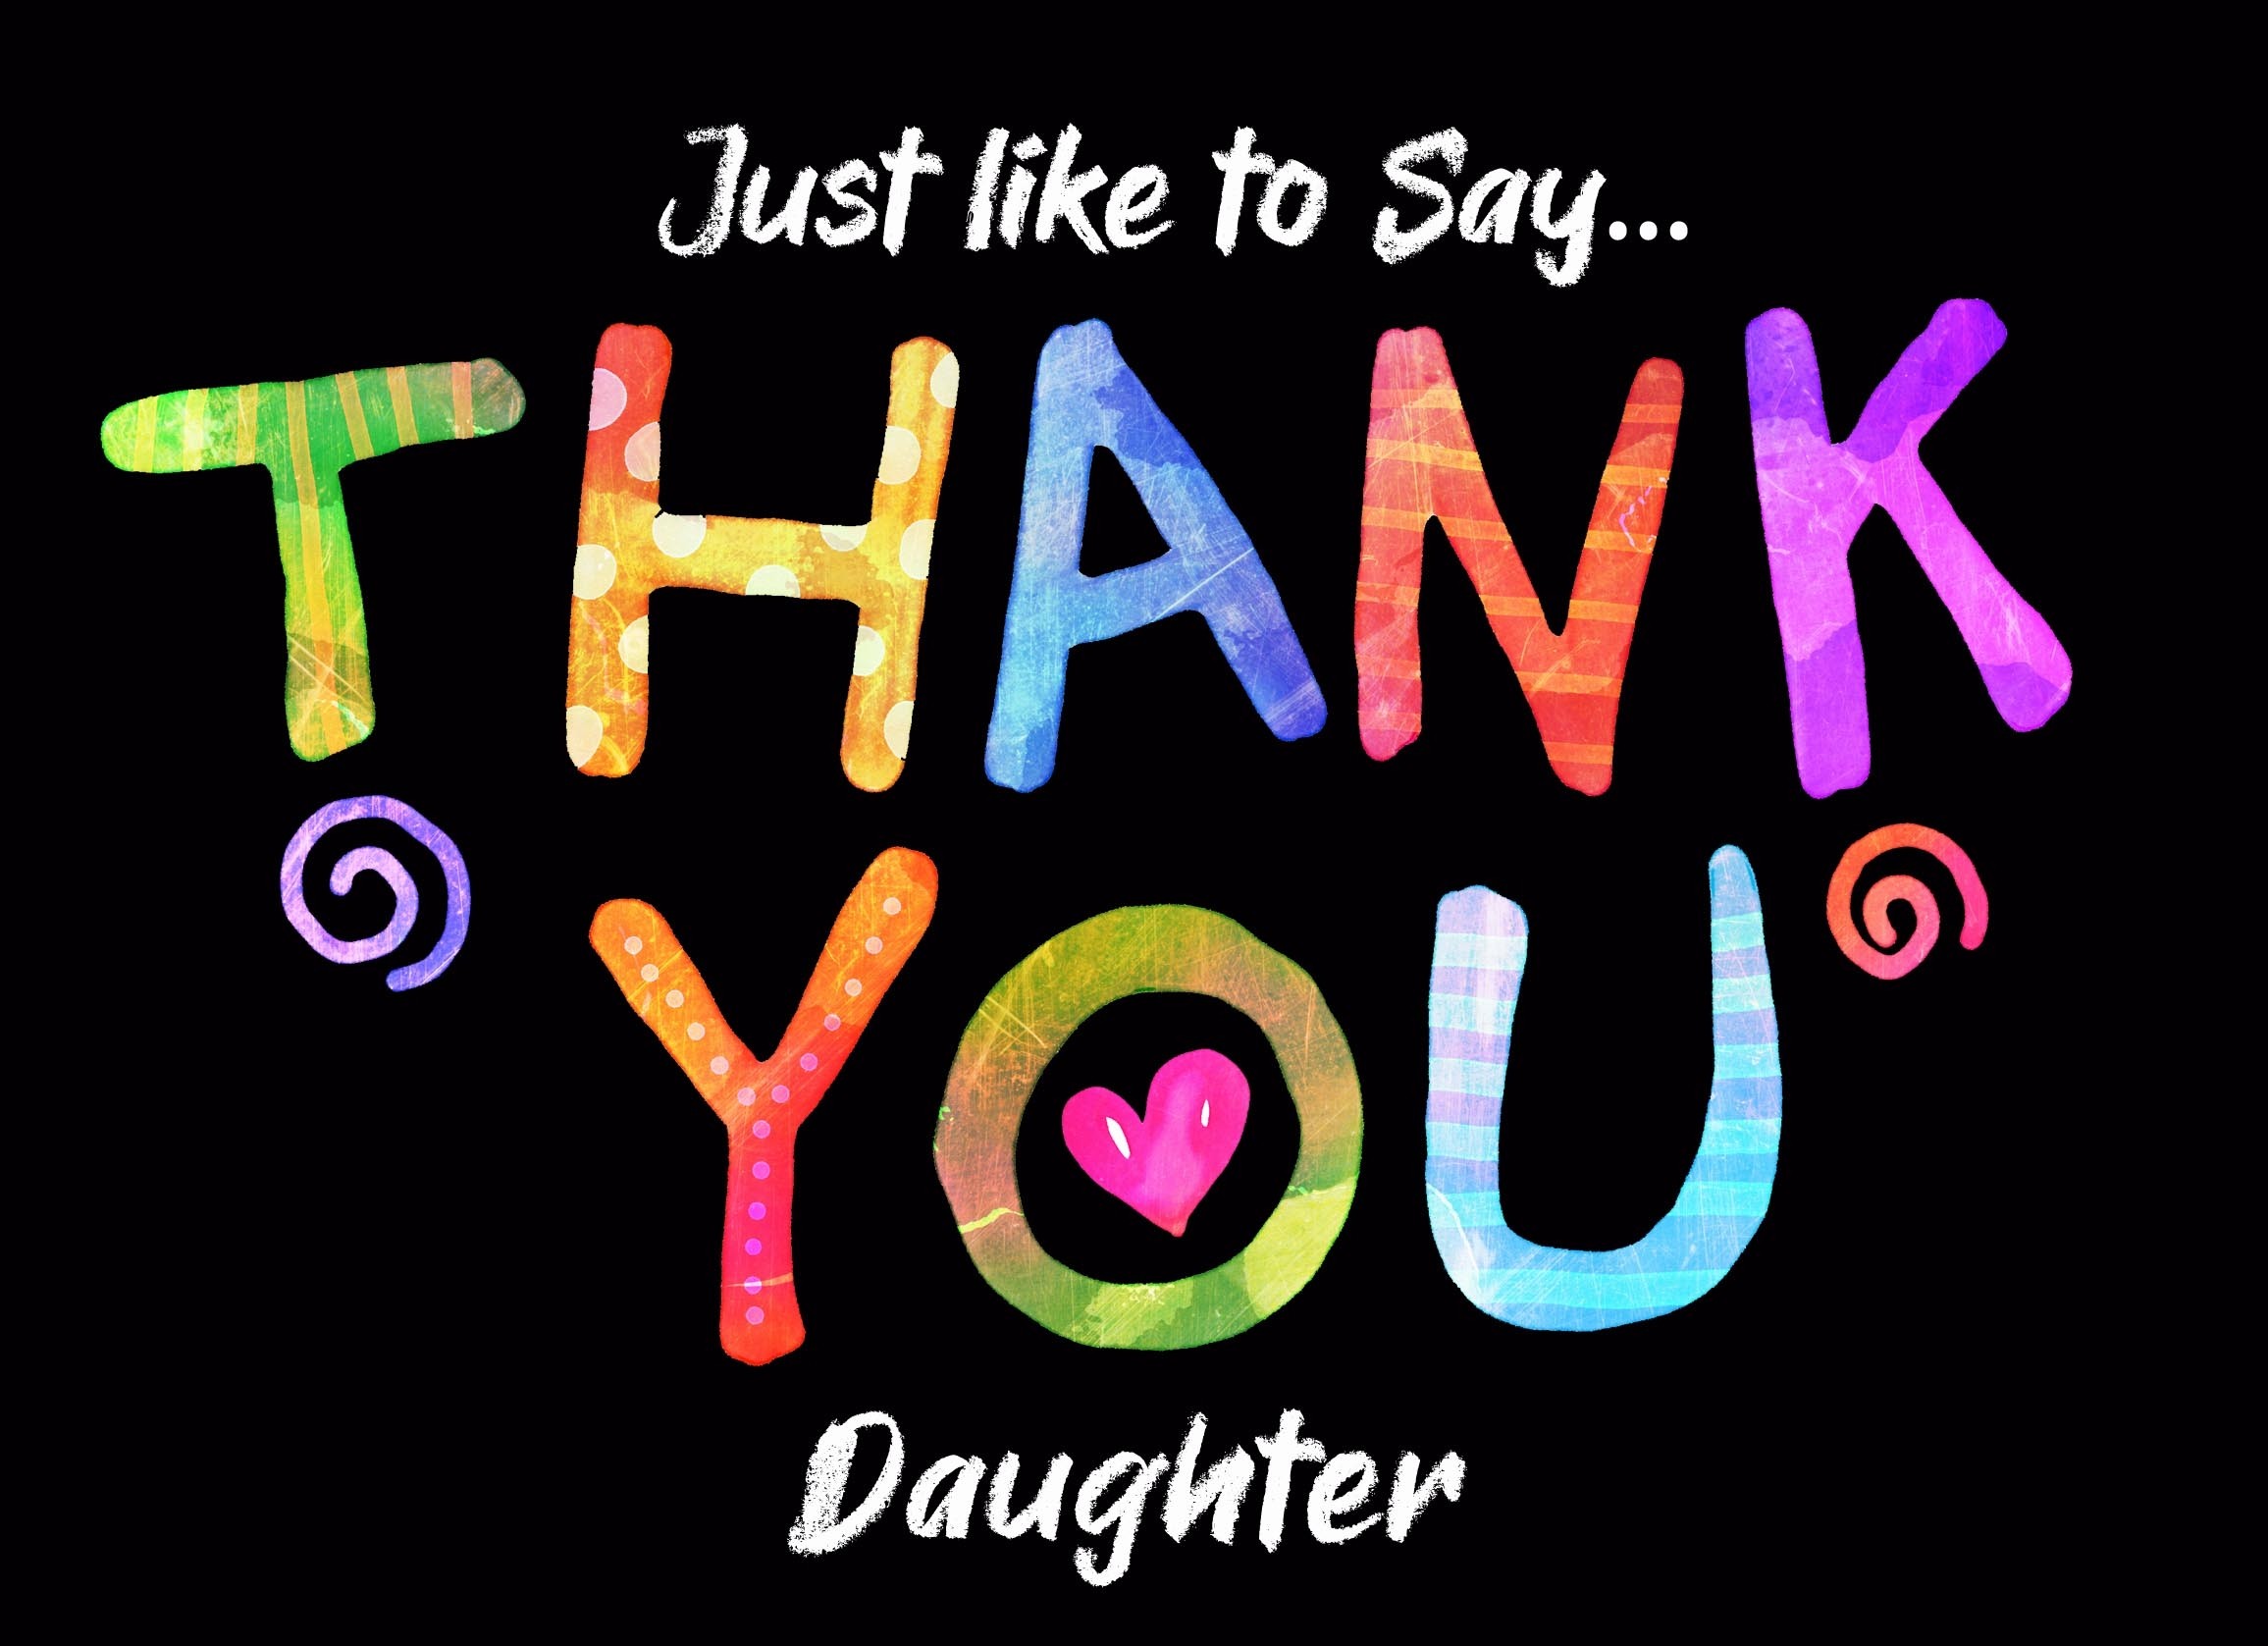 Thank You 'Daughter' Greeting Card